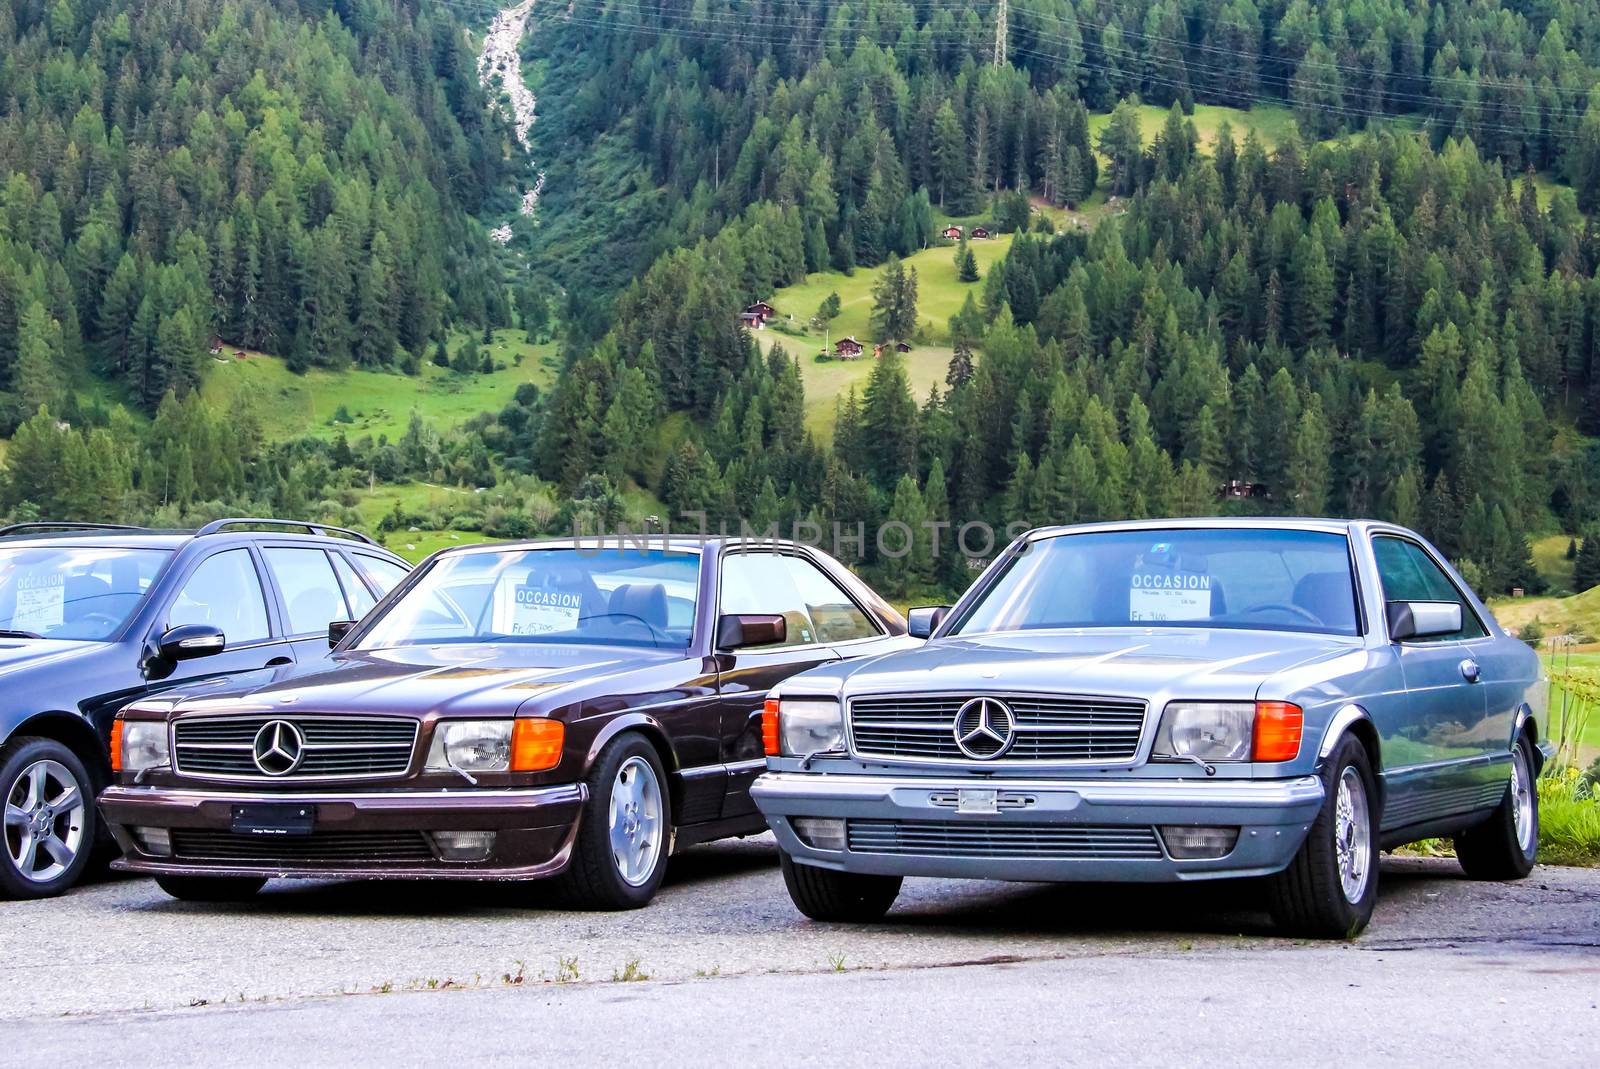 VALAIS, SWITZERLAND - AUGUST 5, 2014: Motor cars Mercedes Benz W126 SEC-class at the used cars trade center.